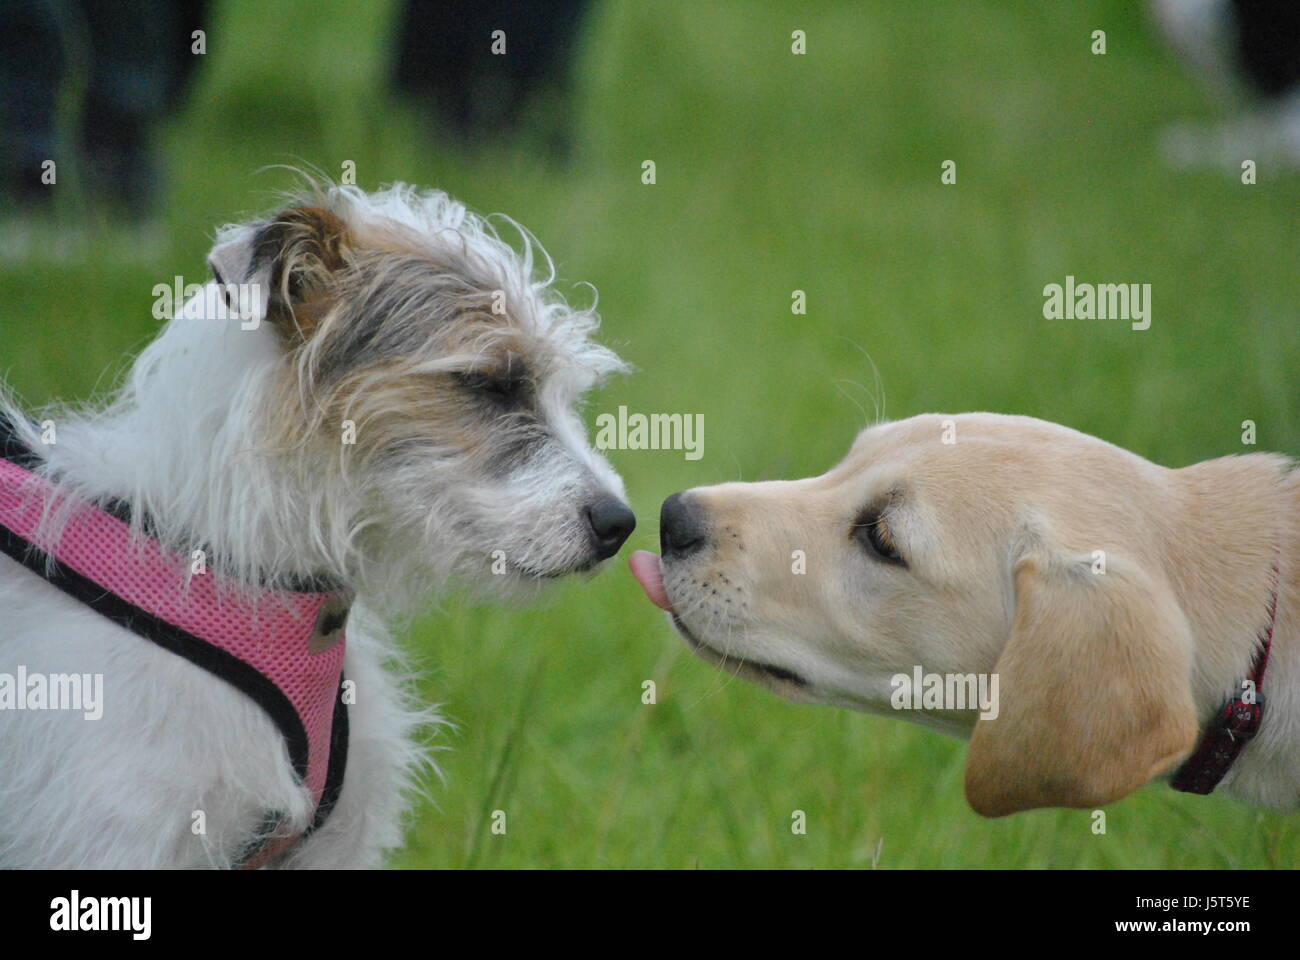 2 Dog meeting with Labrador puppy cute doggy greeting Stock Photo